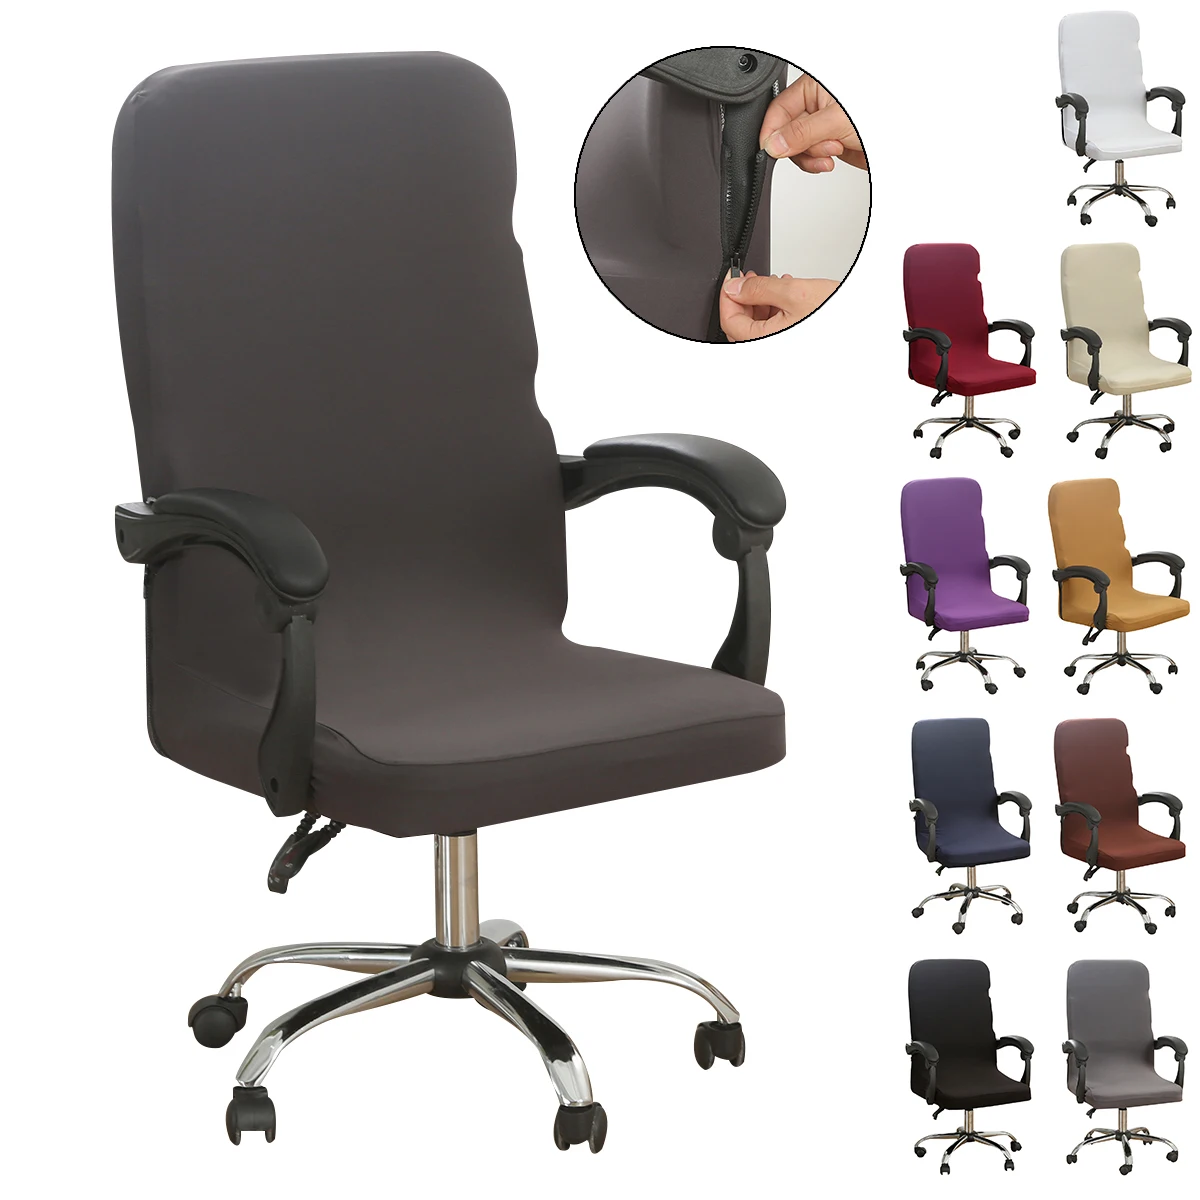 

Elastic Office Lift Computer Chair Cover Anti-Dirty Rotating Chair Seat Case With Zipper Solid Spandex Removable Chair Slipcover